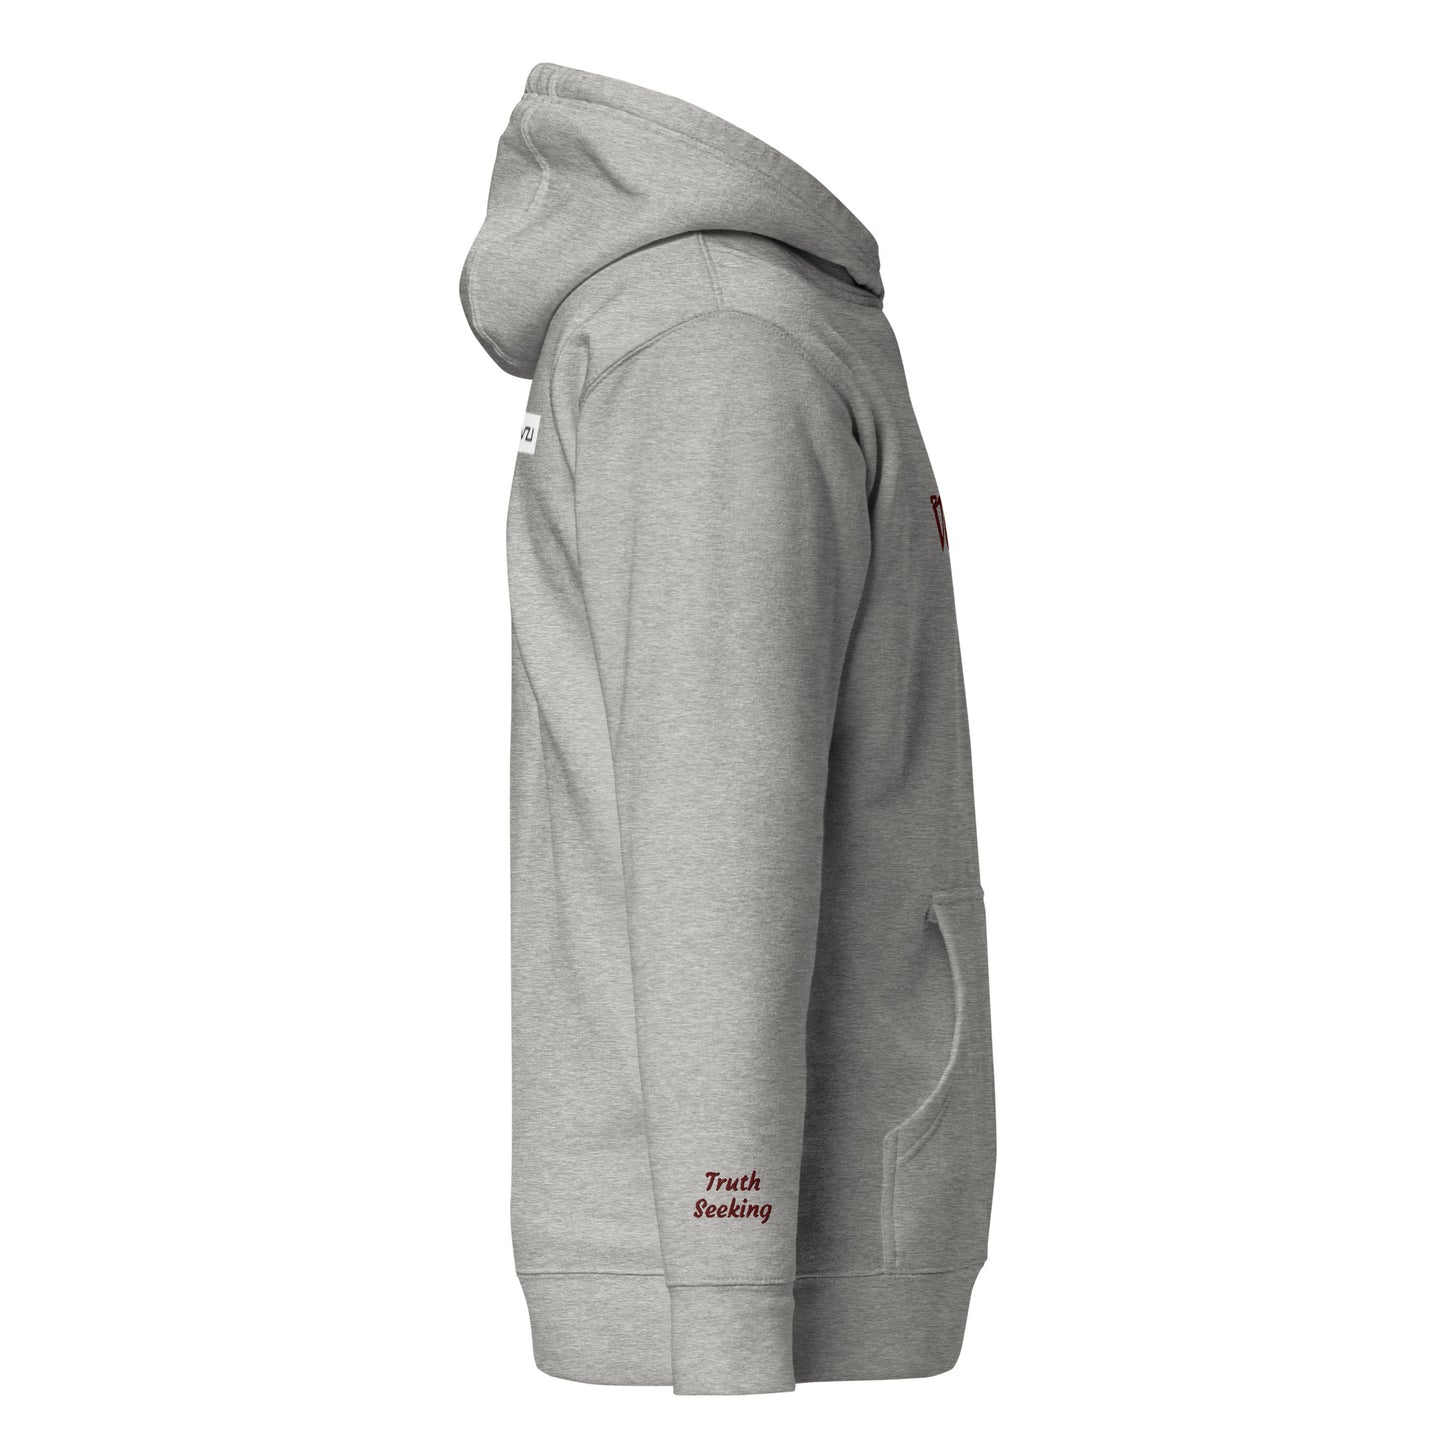 Veriterra: Women's Hoodie, Classic Cotton: Focus on authenticity and naturalness(Truth Seeking)